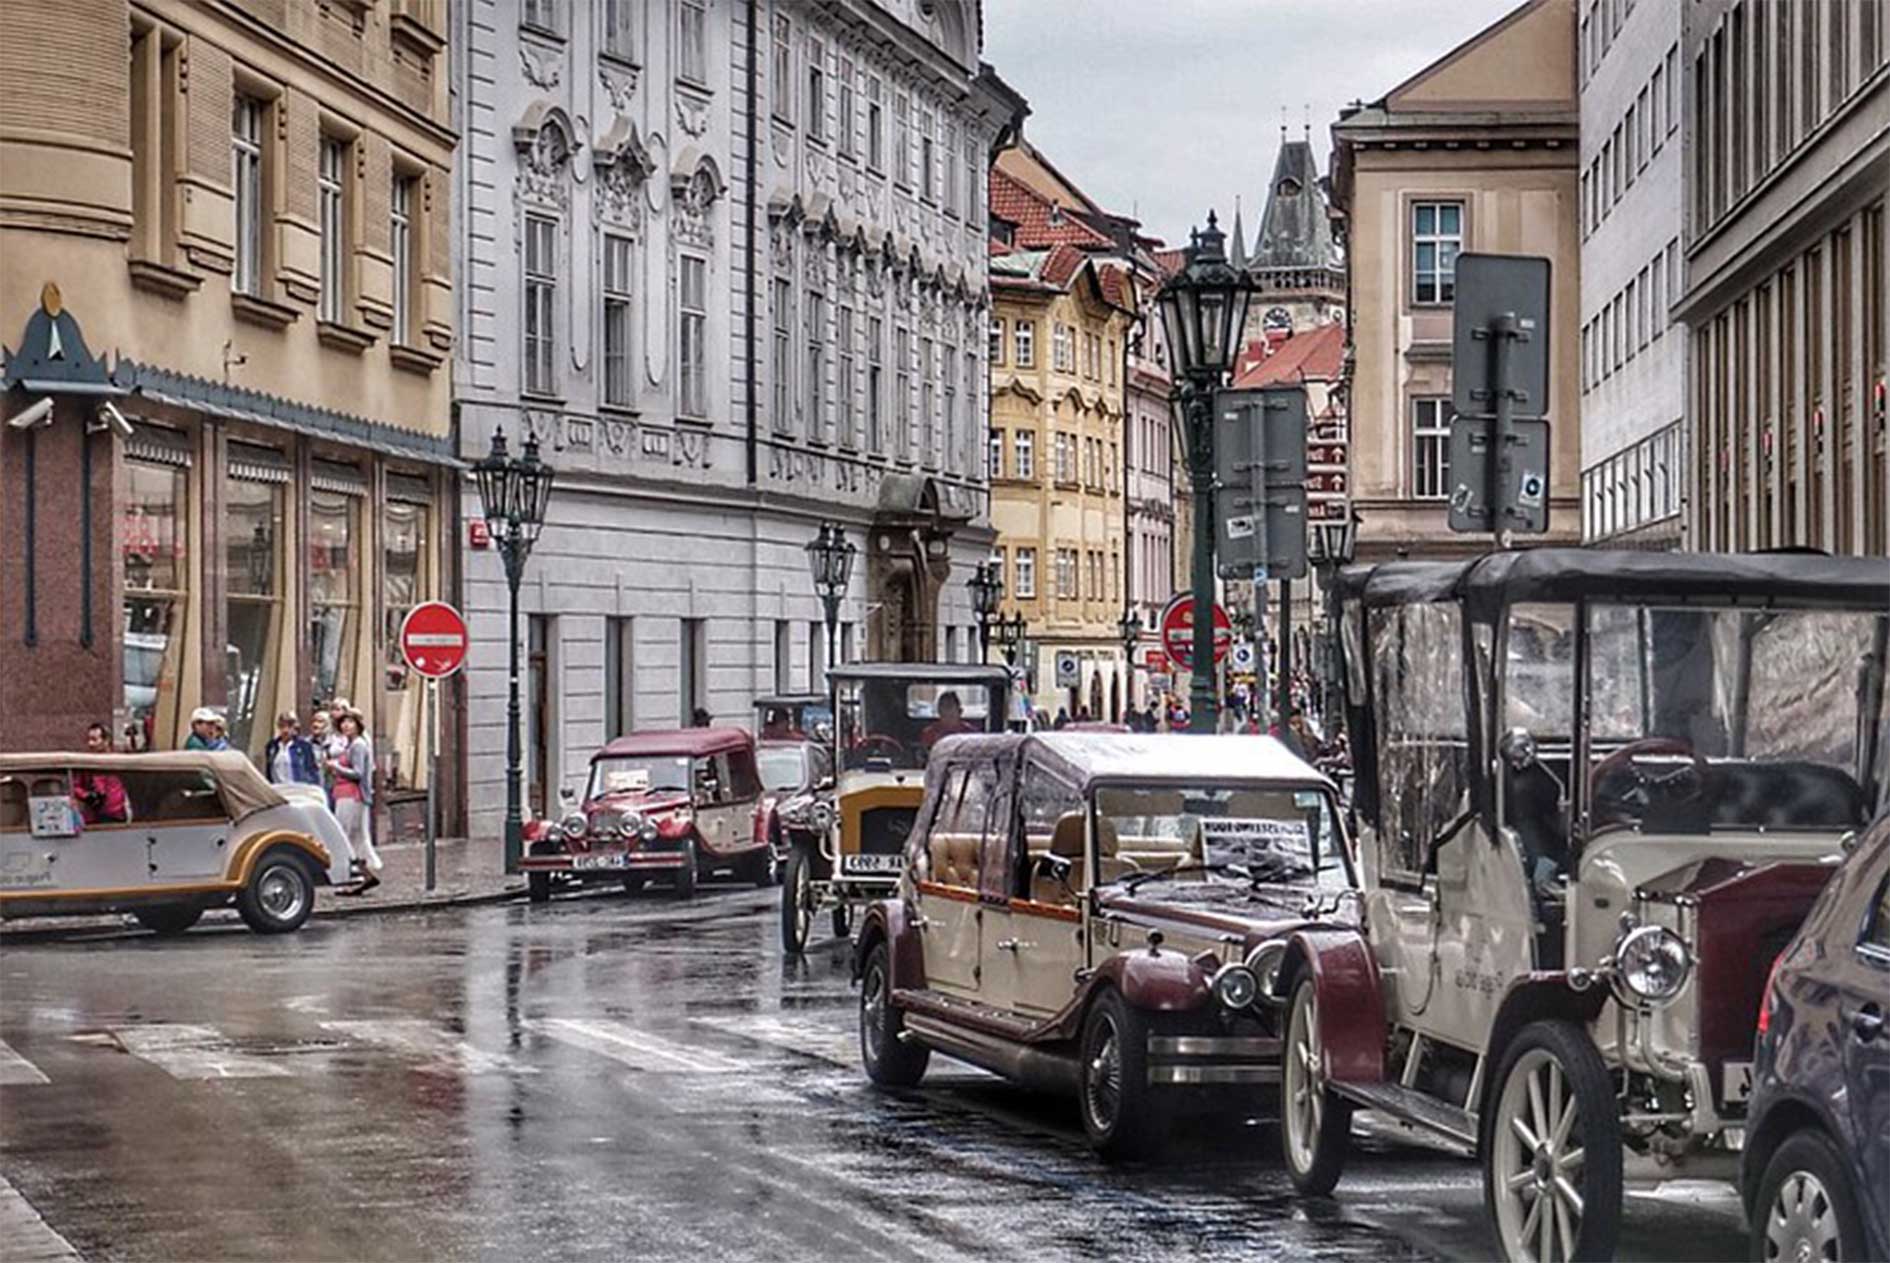 You can hire the antique car and have a trip around the historical centre of the city